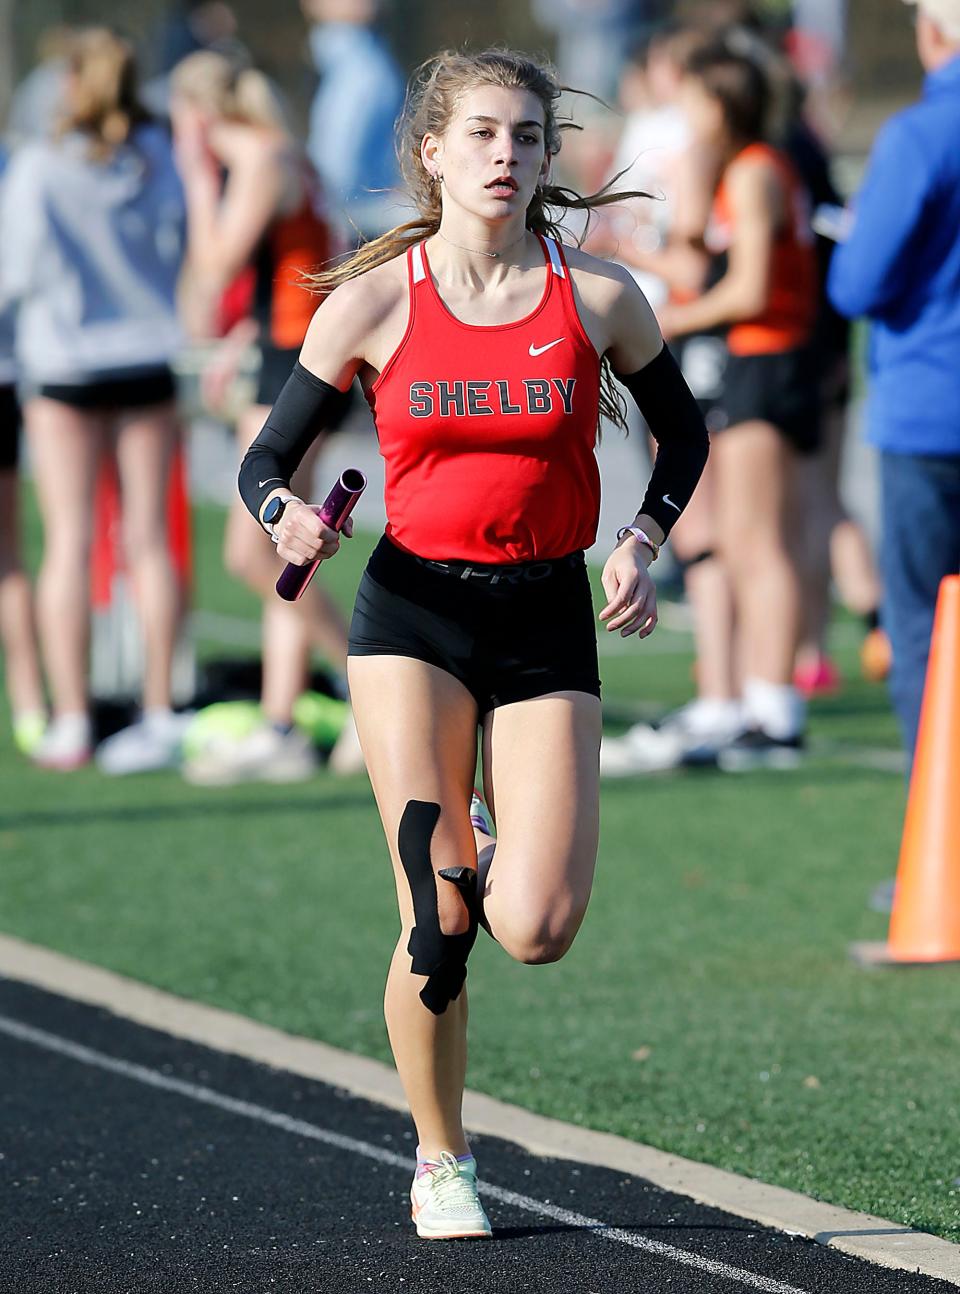 Shelby High School's Kayla Gonzales competes in the 4x800 relay at the Madison Track Invitational at Madison Comprehensive High School Thursday, March 30, 2023. TOM E. PUSKAR/ASHLAND TIMES-GAZETTE